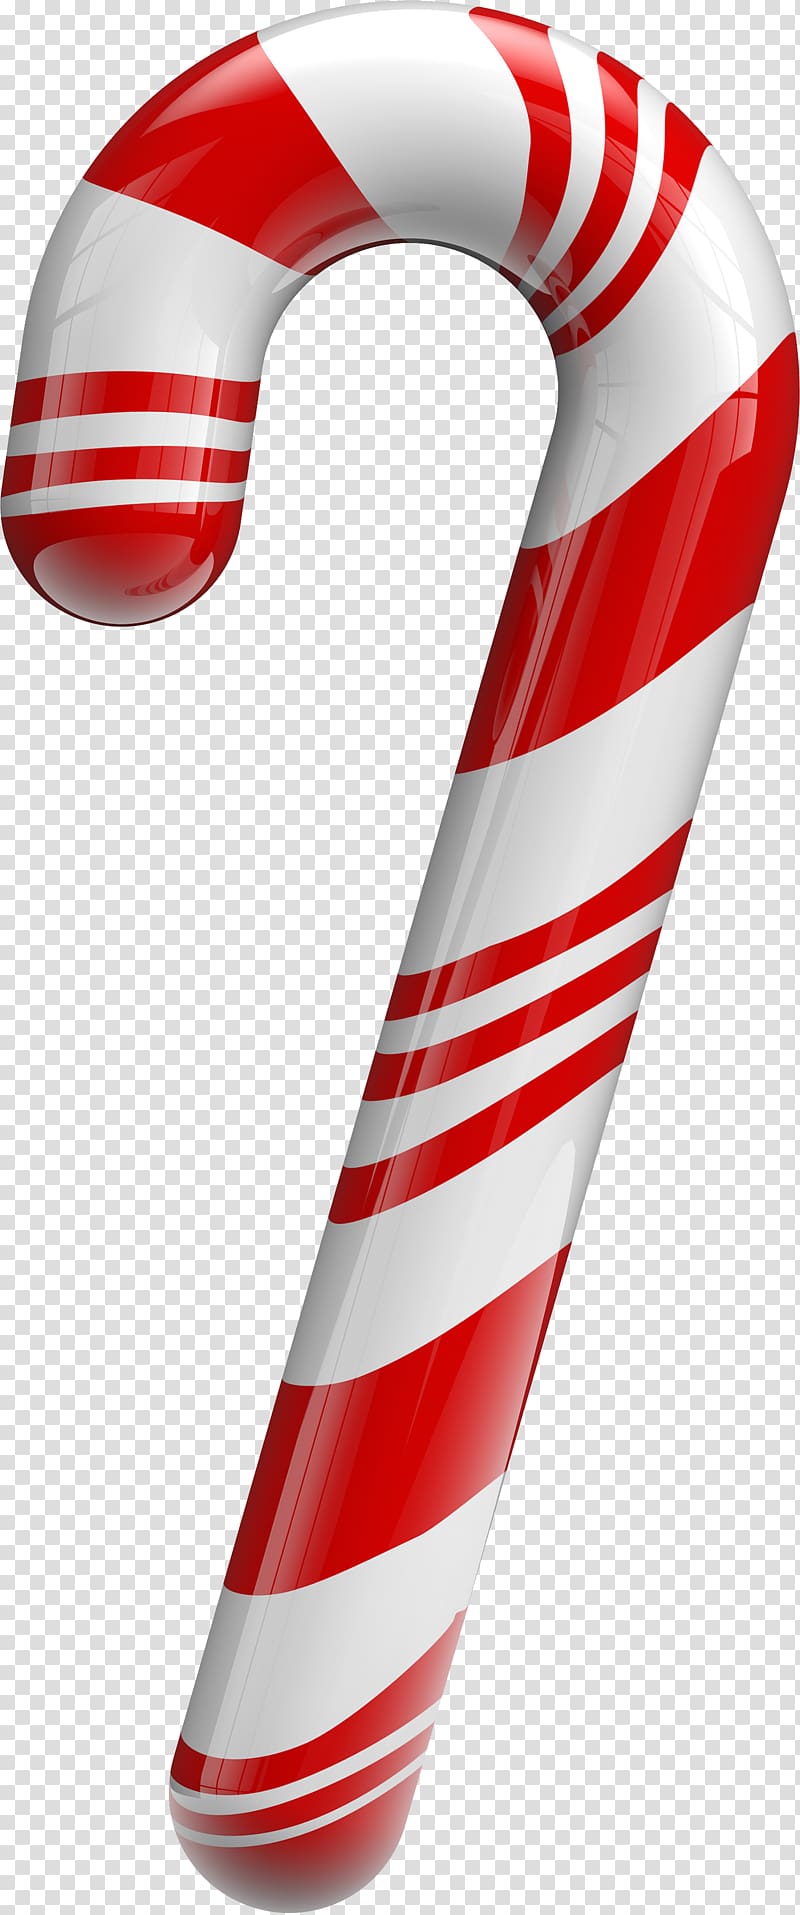 red and white candy cane, Candy cane Lollipop Christmas , Christmas decorations, candy canes, free pick ups, free transparent background PNG clipart